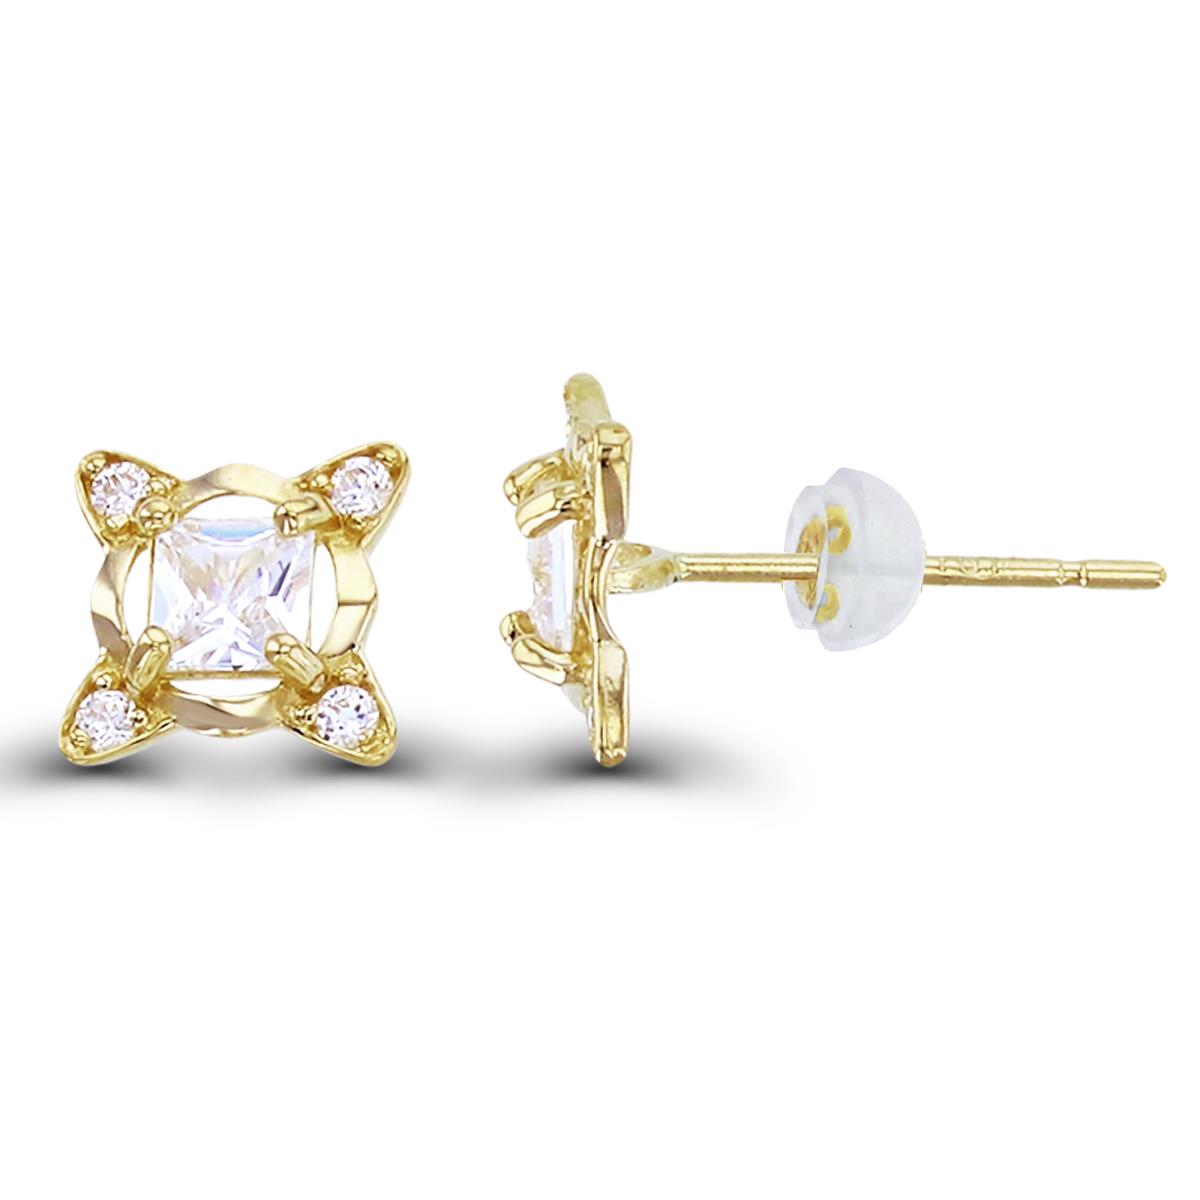 10K Yellow Gold 3mm SQ & Rnd CZ Clover Studs with Silicon Backs